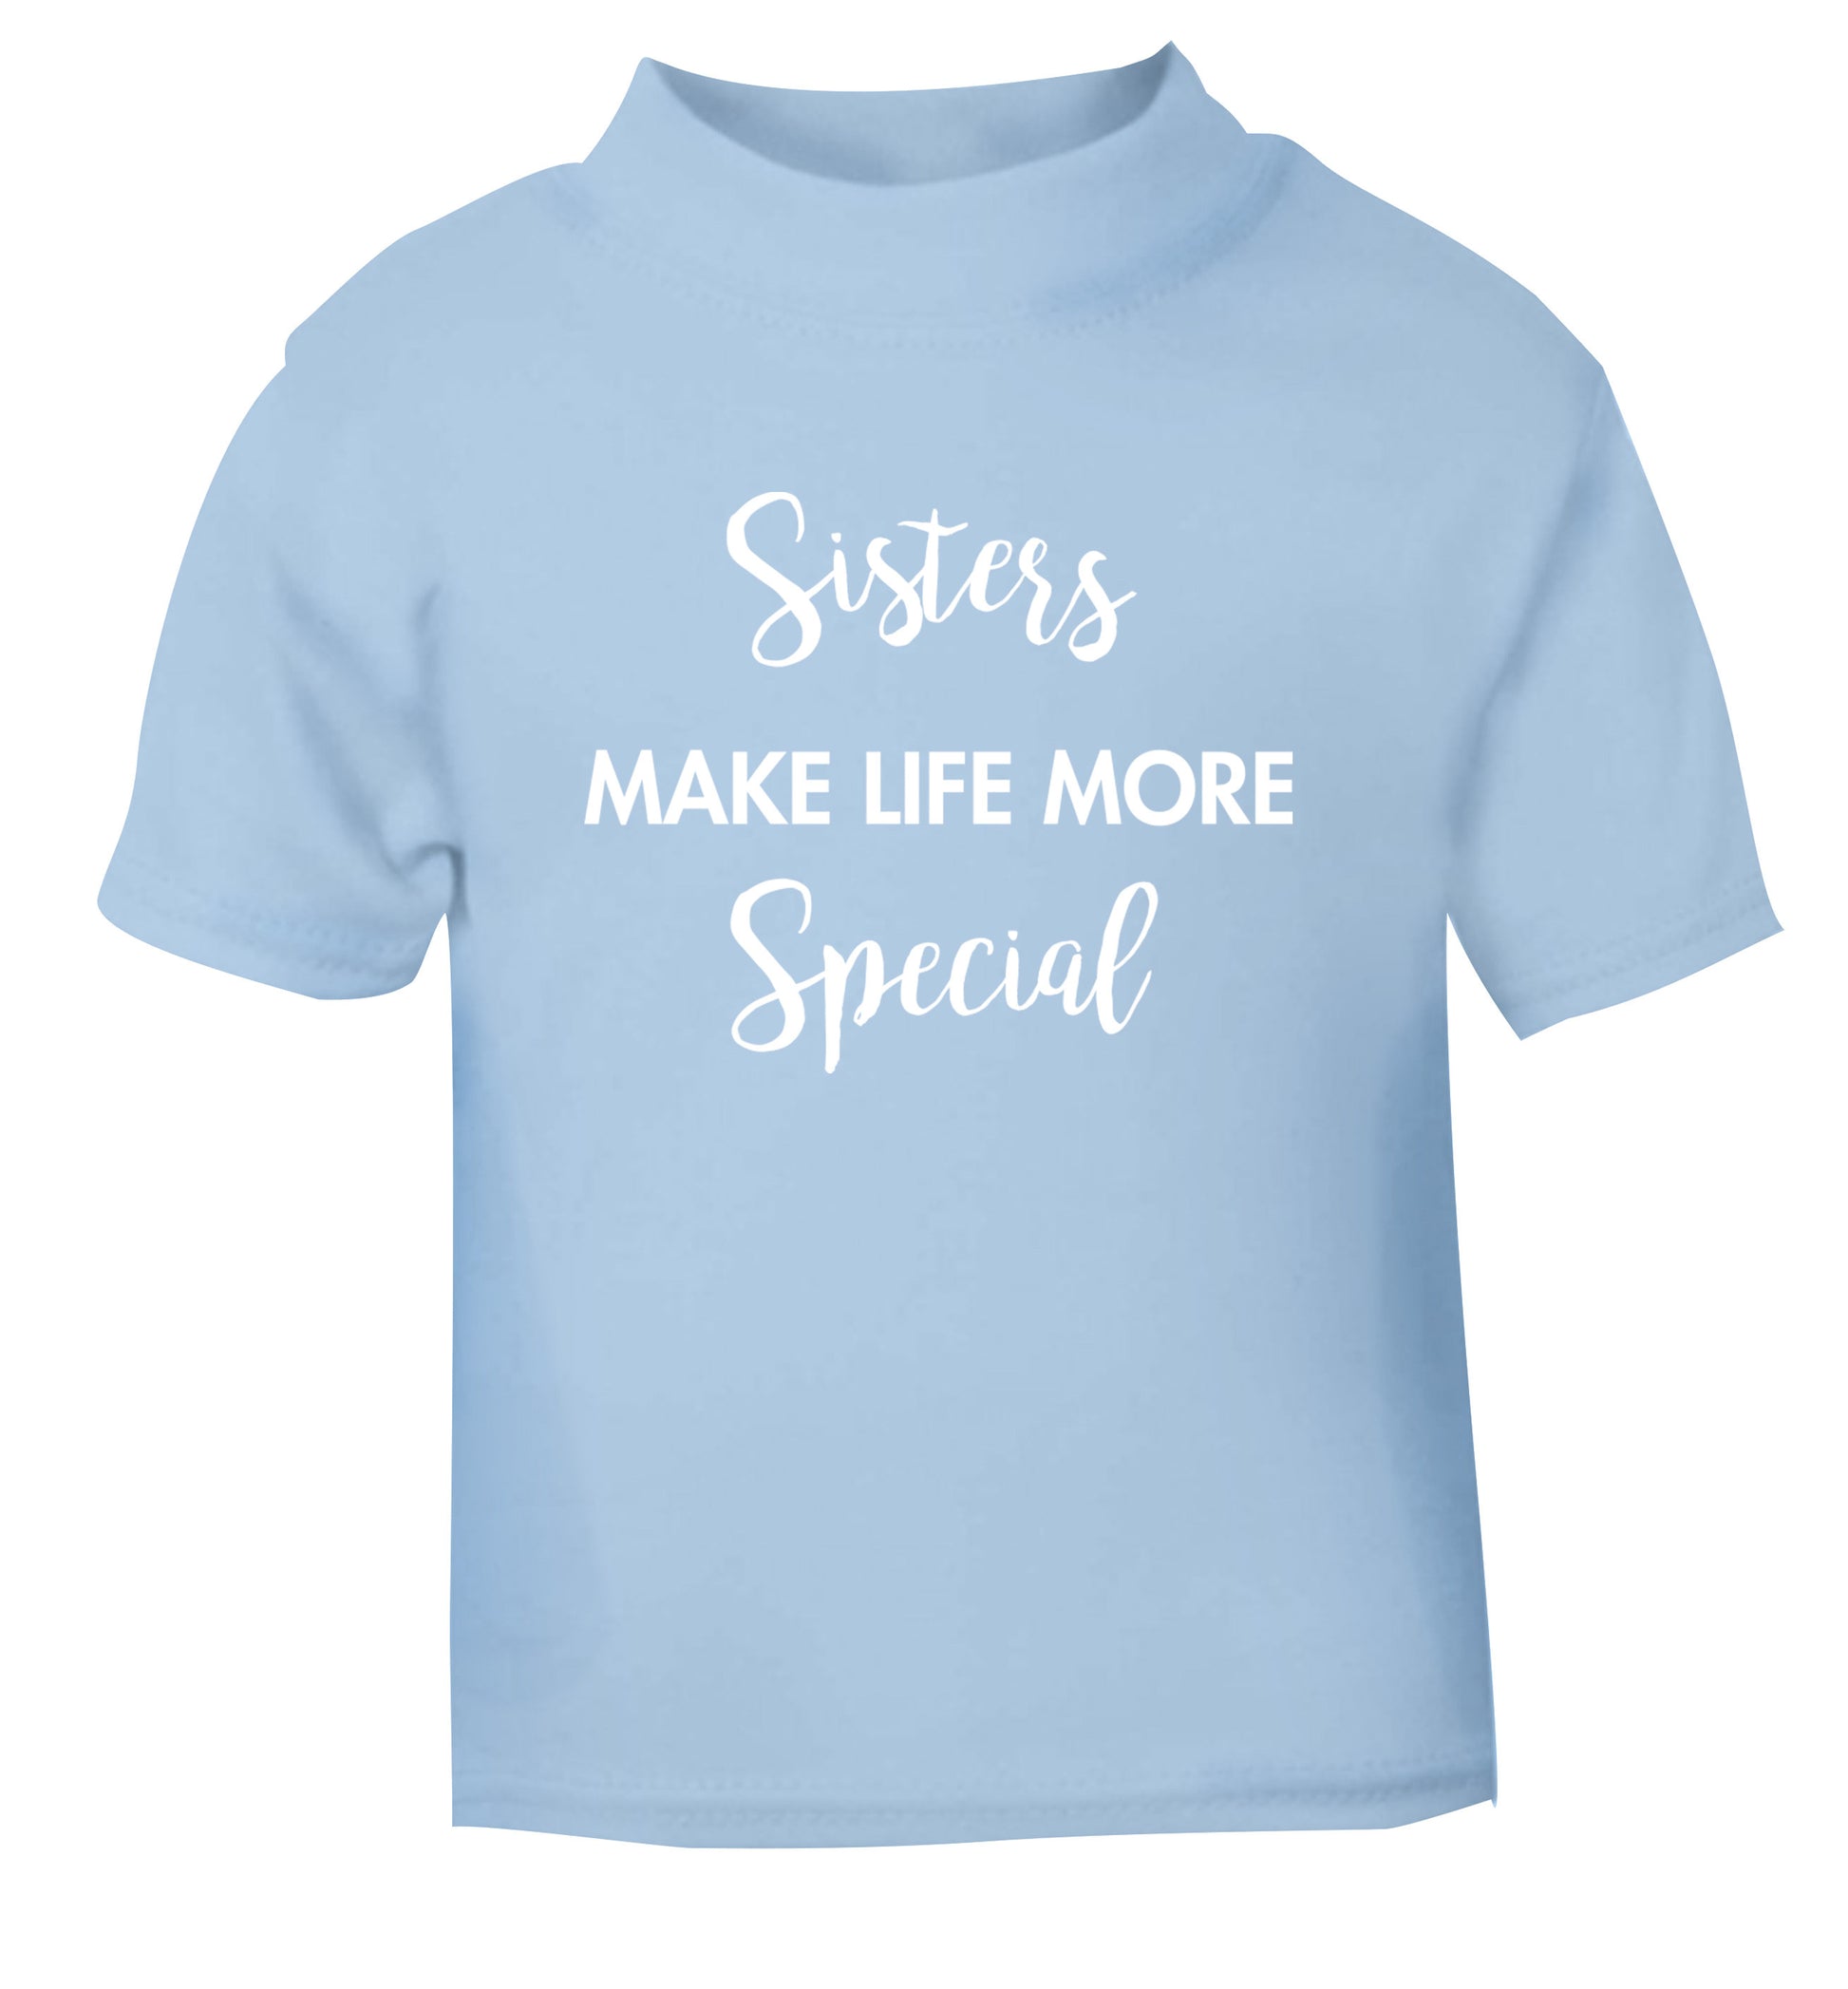 Sisters make life more special light blue Baby Toddler Tshirt 2 Years